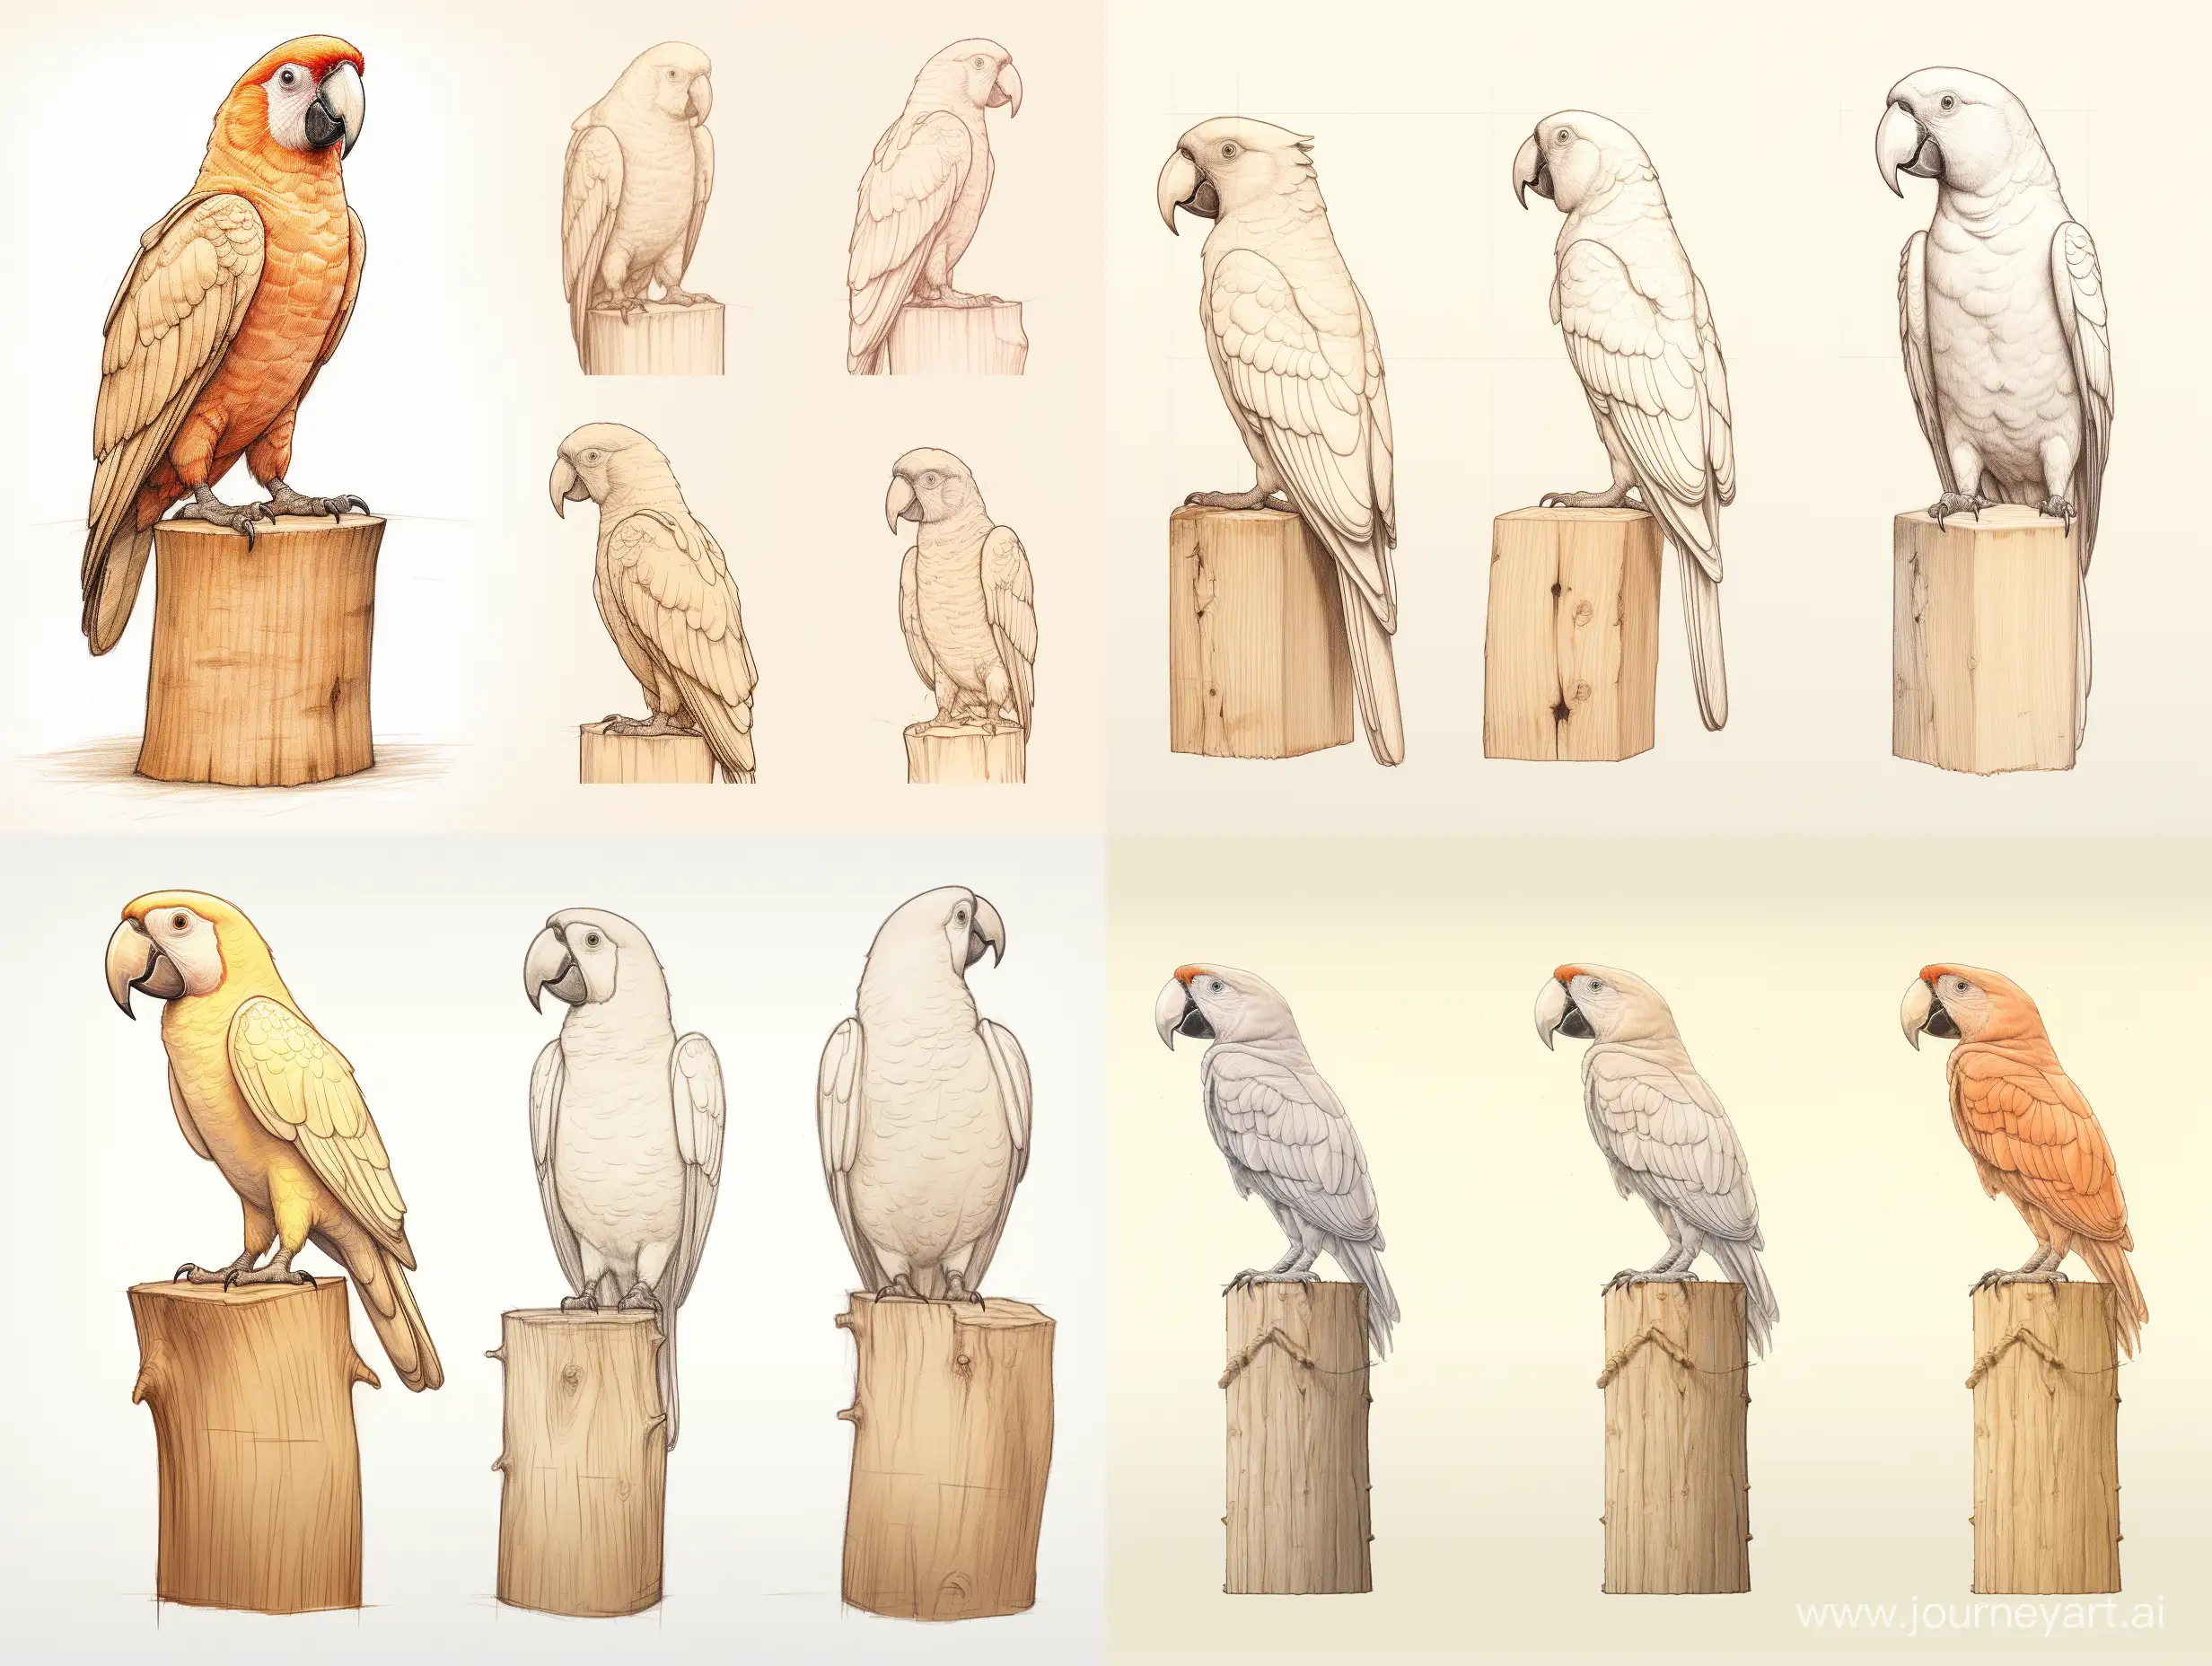 Realistic-Wooden-Parrot-Sculpture-on-Large-Cube-Professional-Wood-Carving